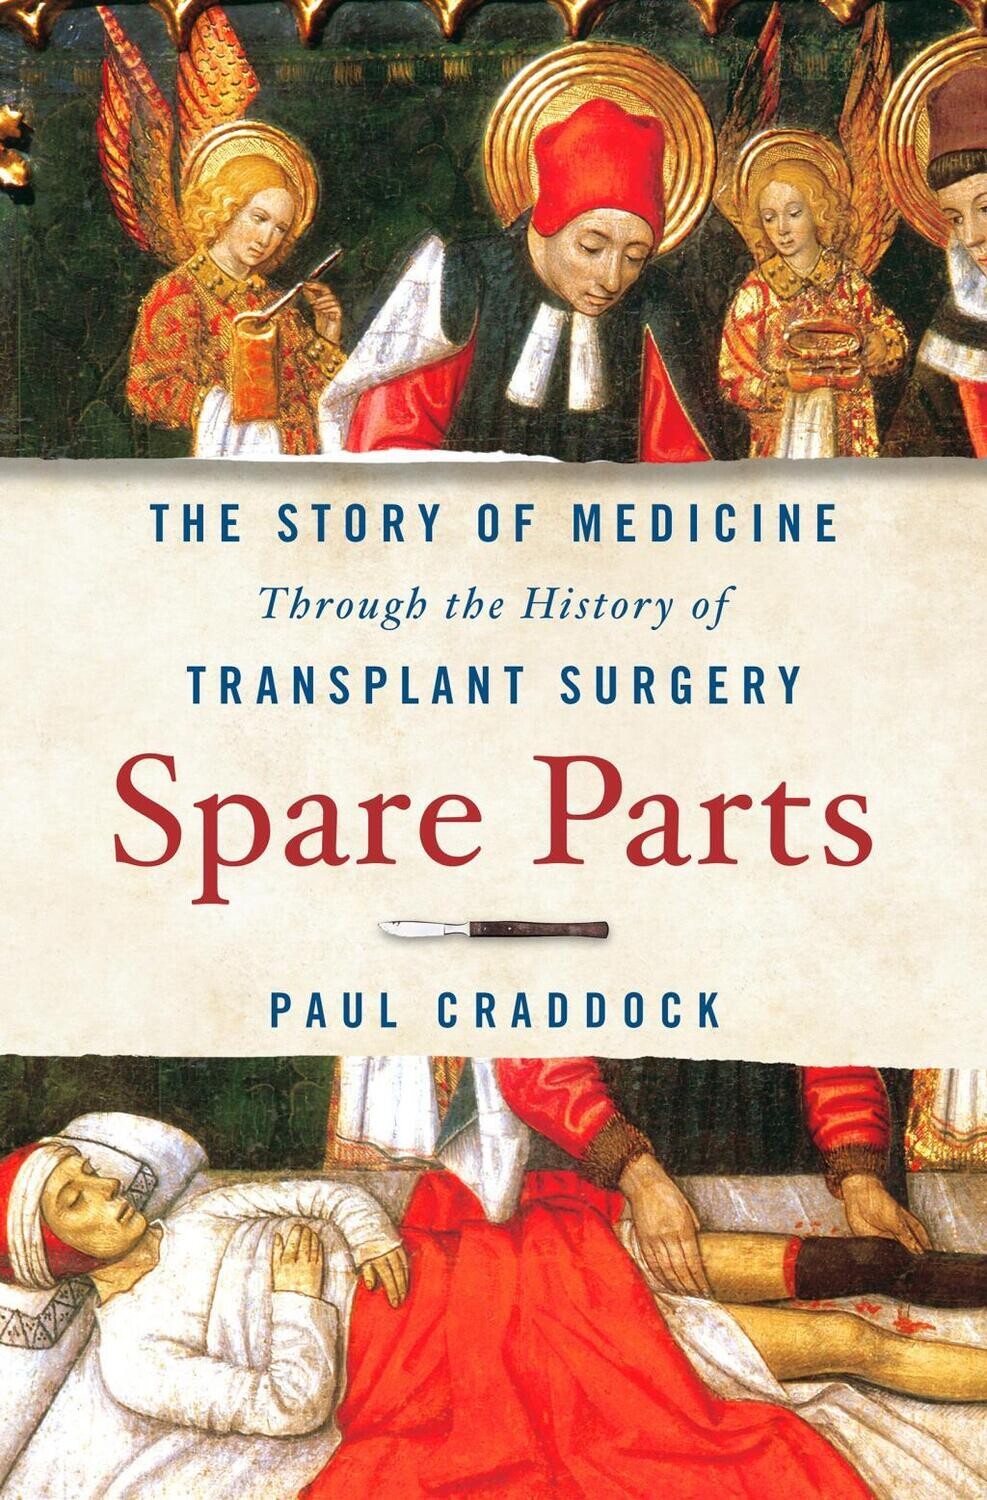 Spare Parts: The Story of Medicine Through the History of Transplant Surgery by Paul Craddock